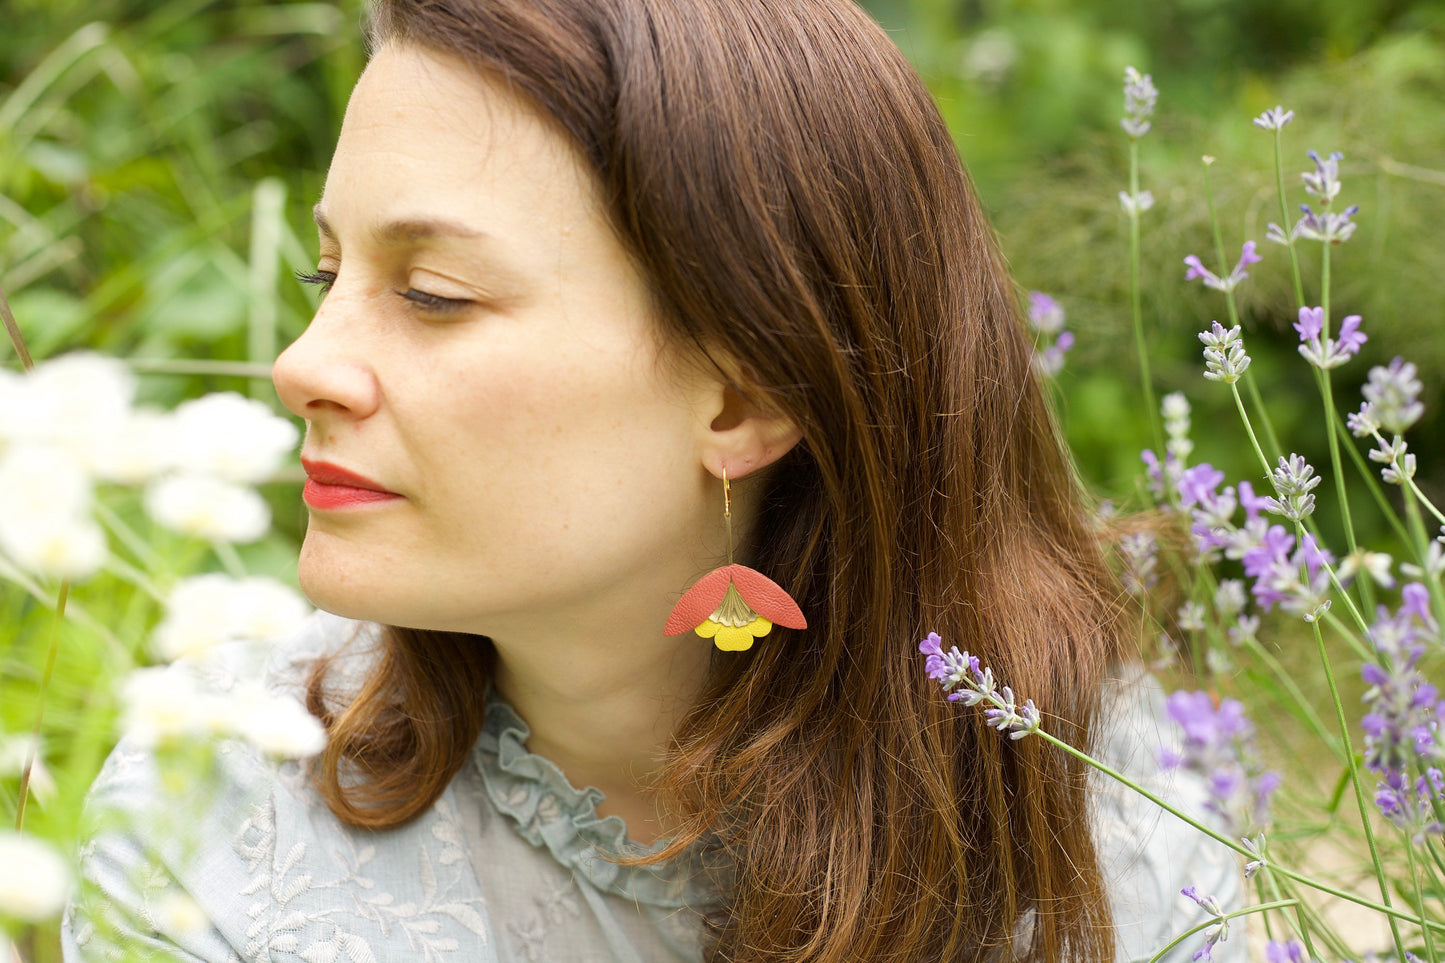 Ginkgo Flower earrings in gold and pink leather